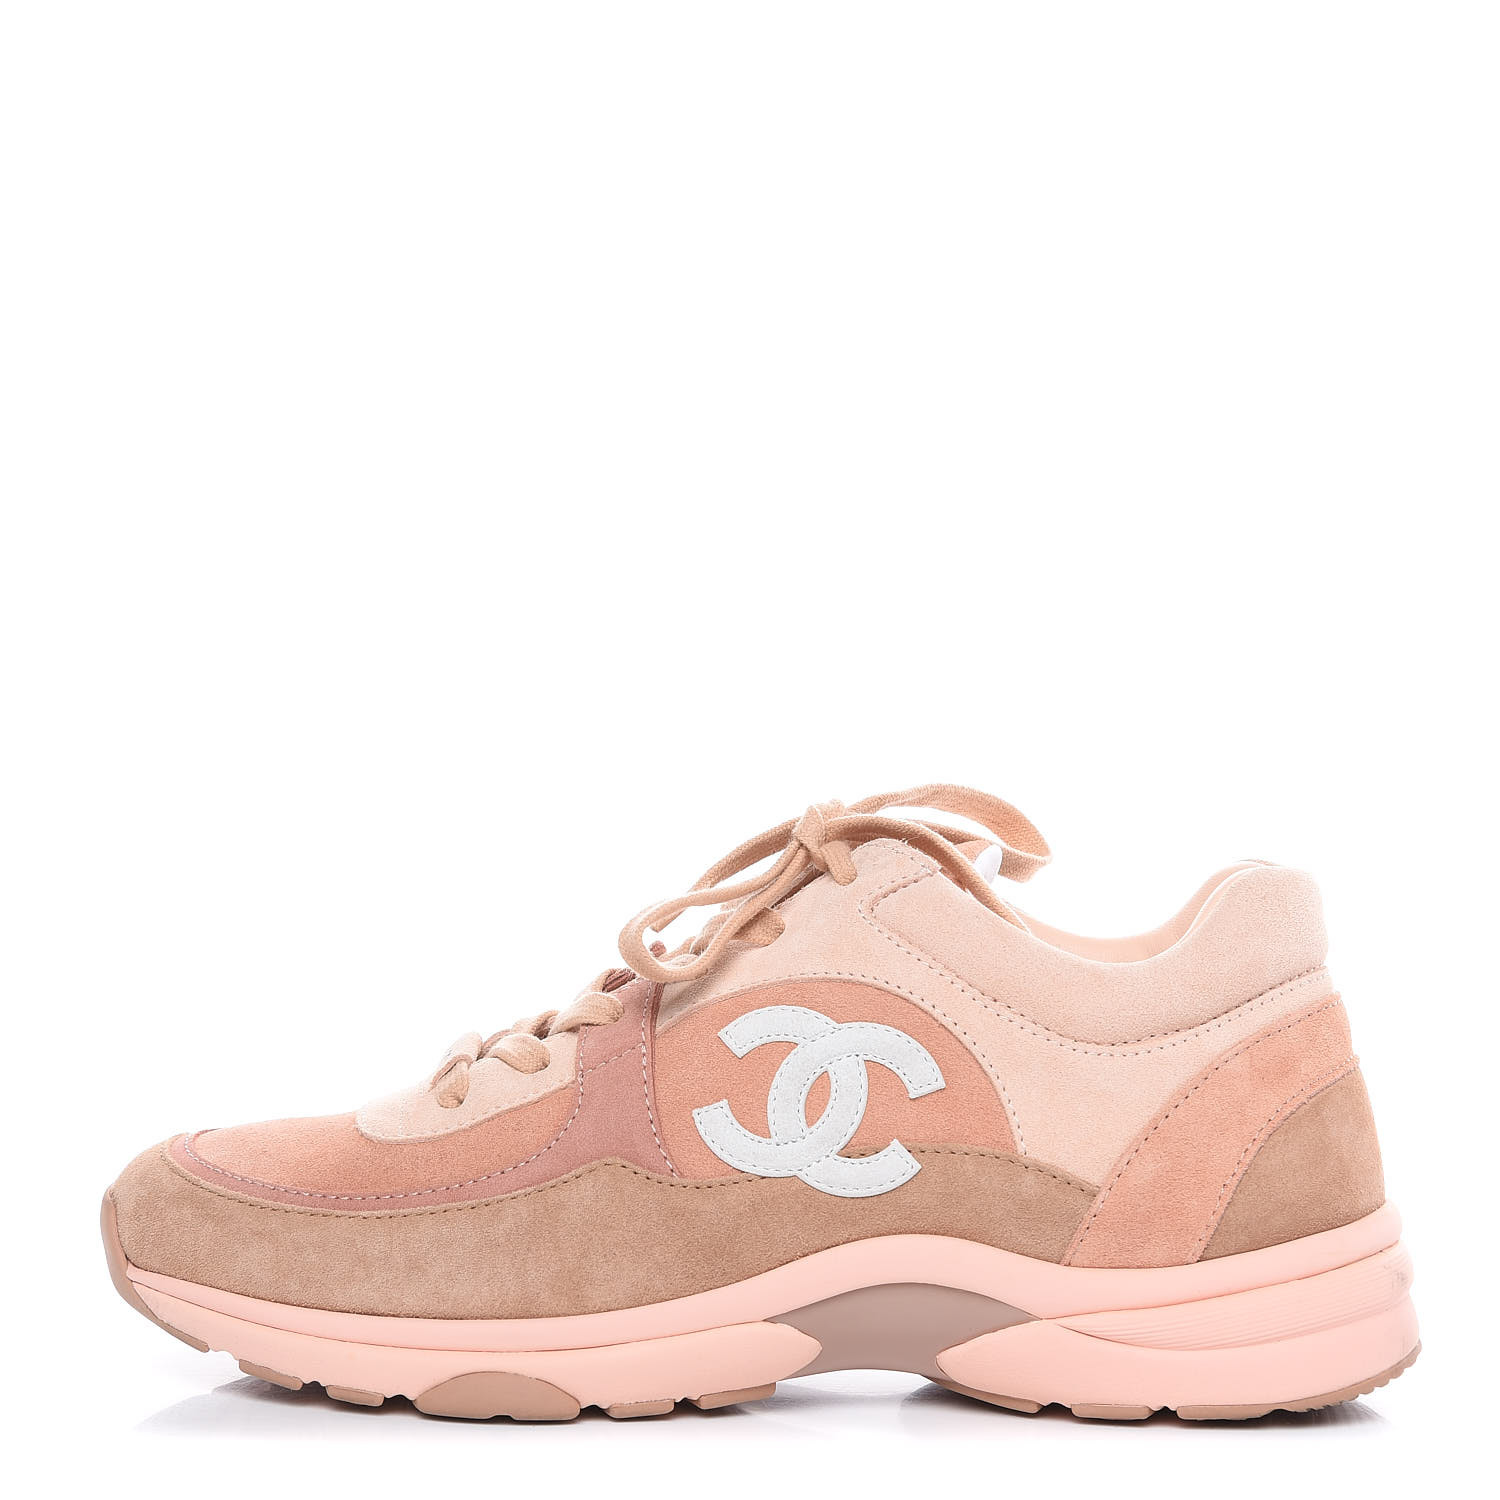 CHANEL Suede Calfskin CC Sneakers 40.5 